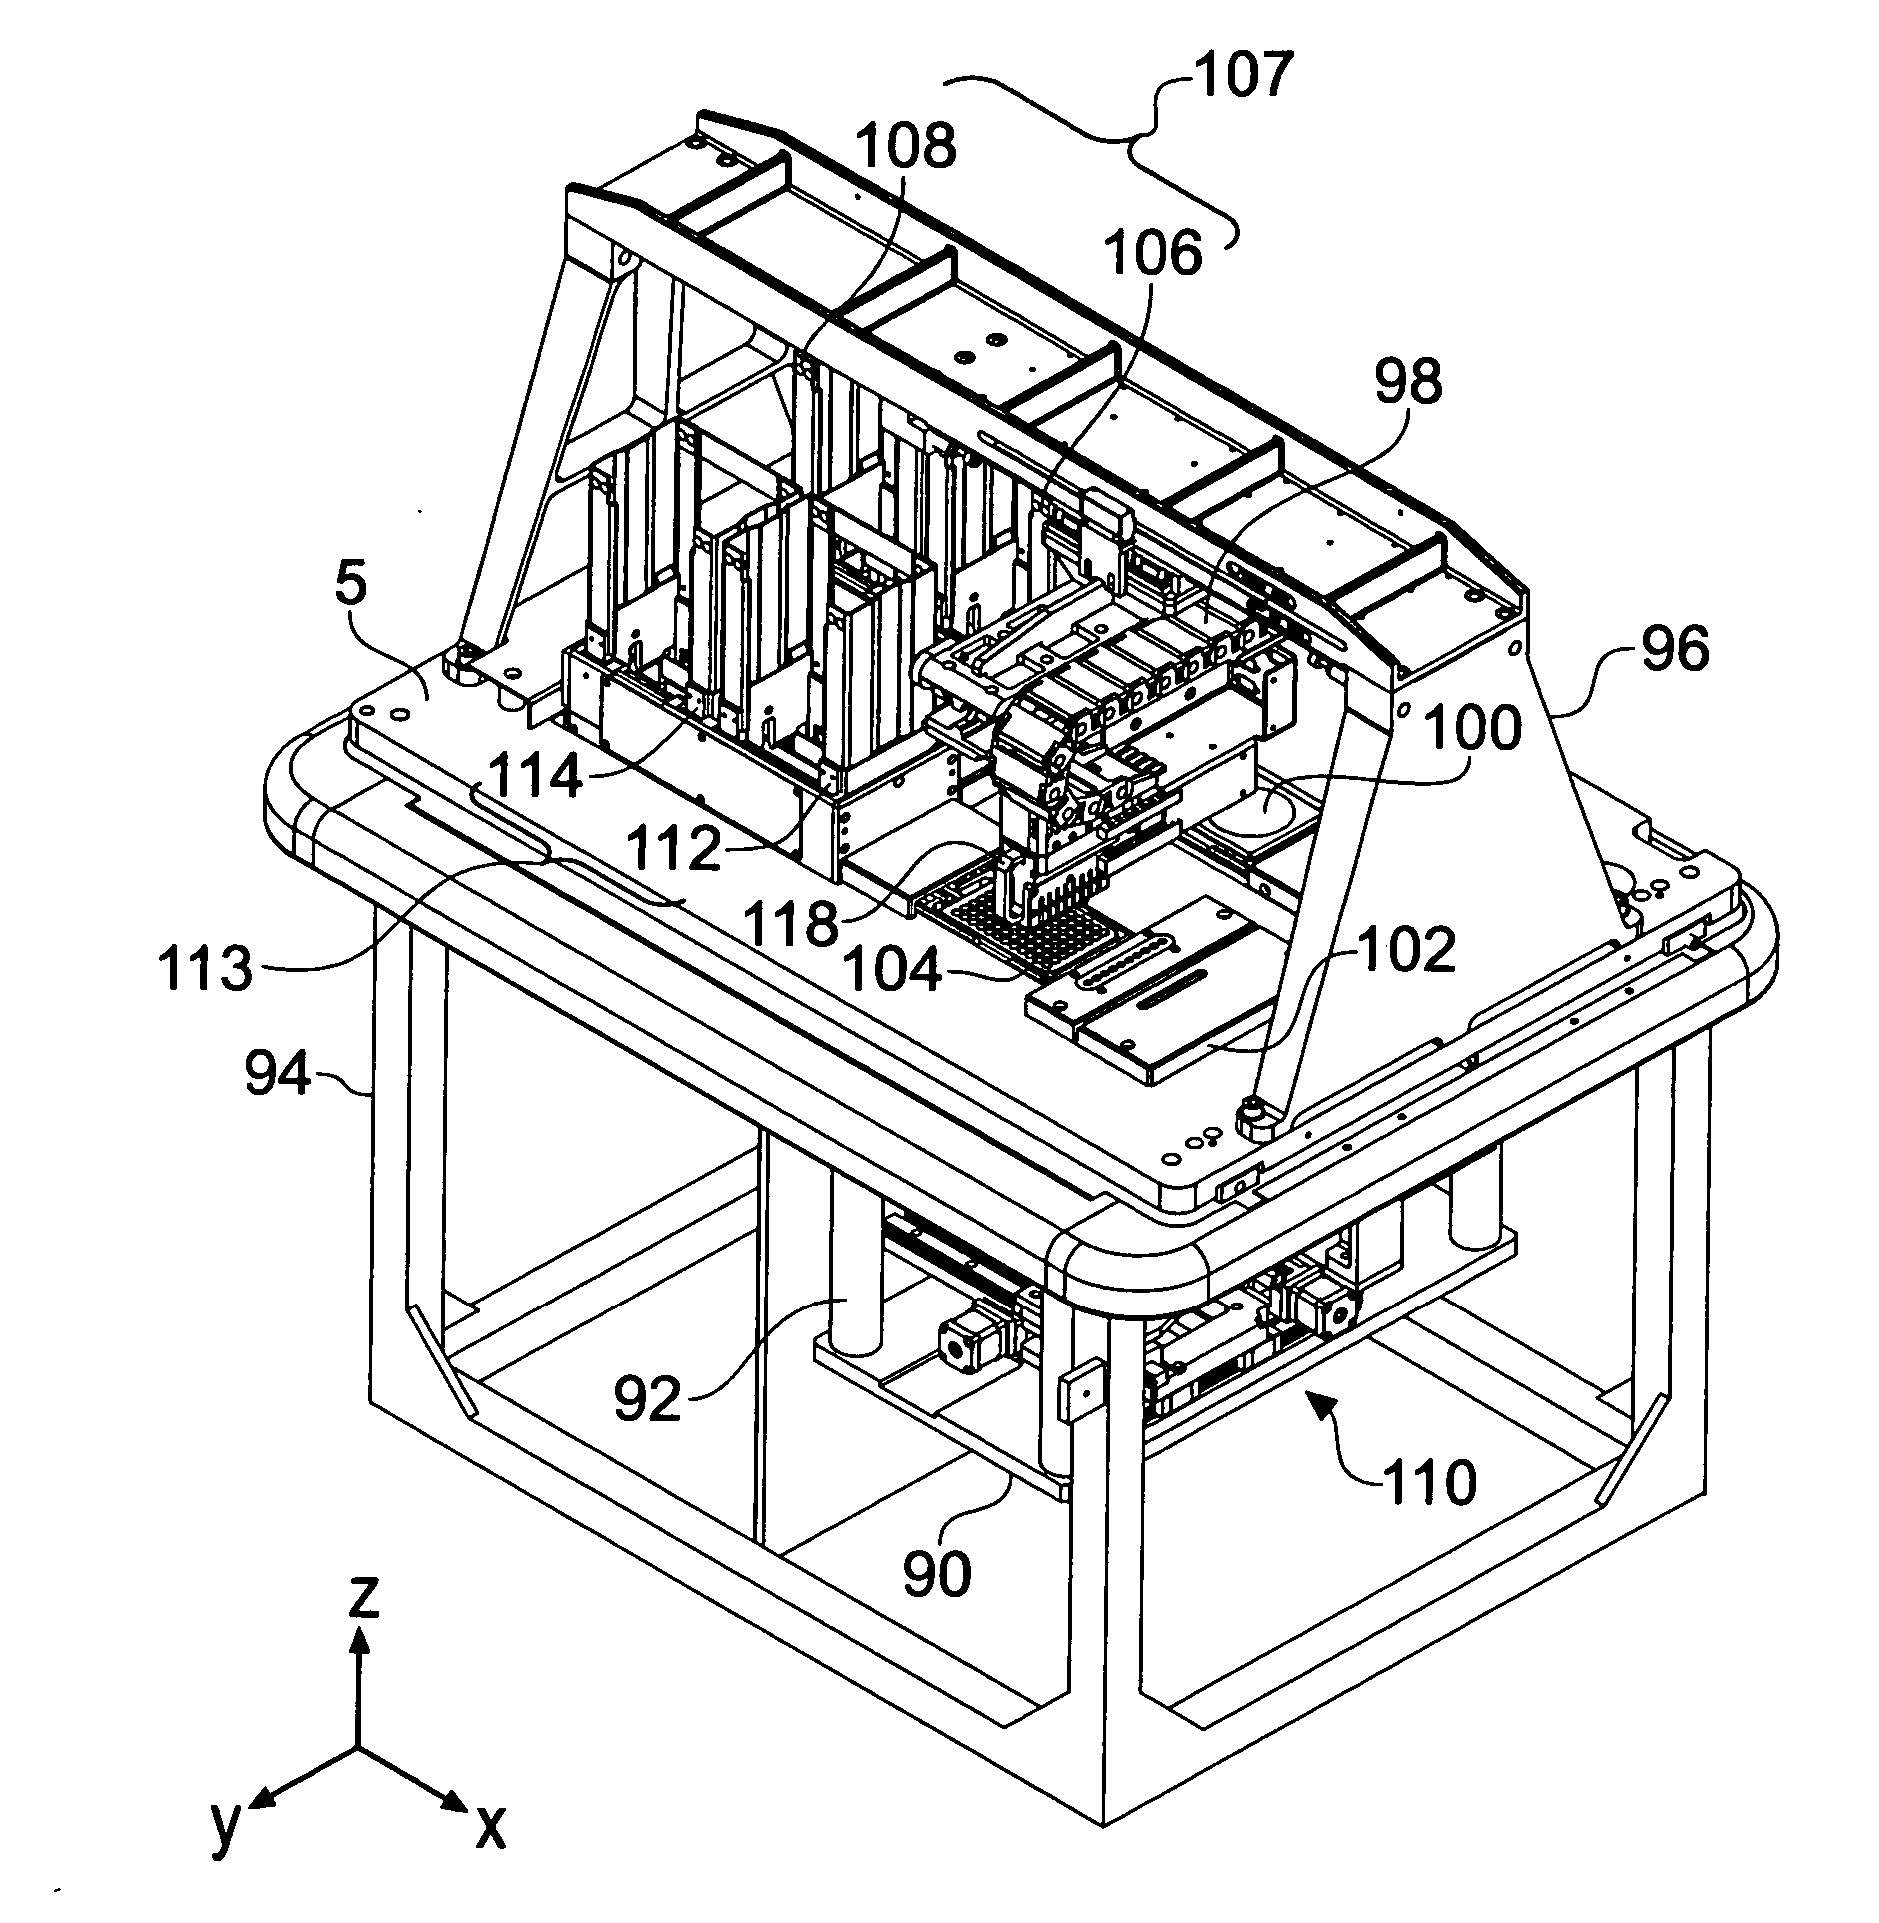 Animal cell confluence detection method and apparatus